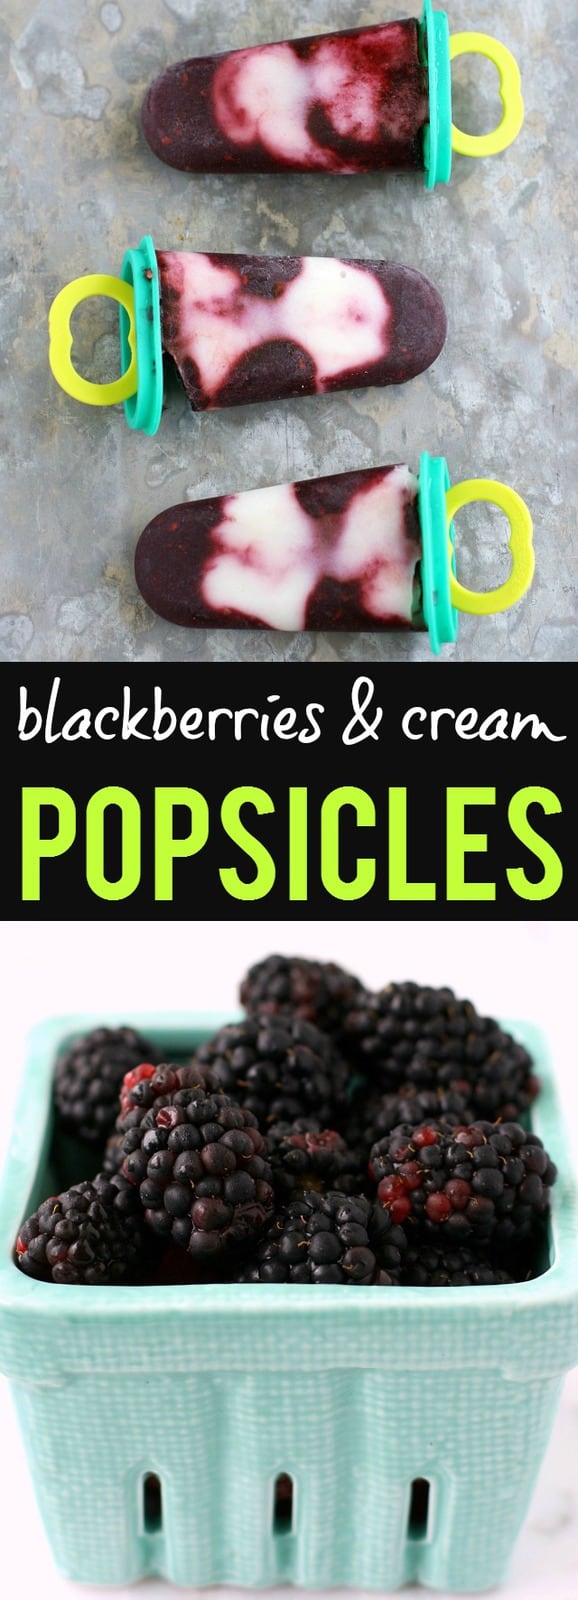 Super simple three ingredient blackberries and cream popsicles. Such a fun and healthy summertime treat! #popsicles